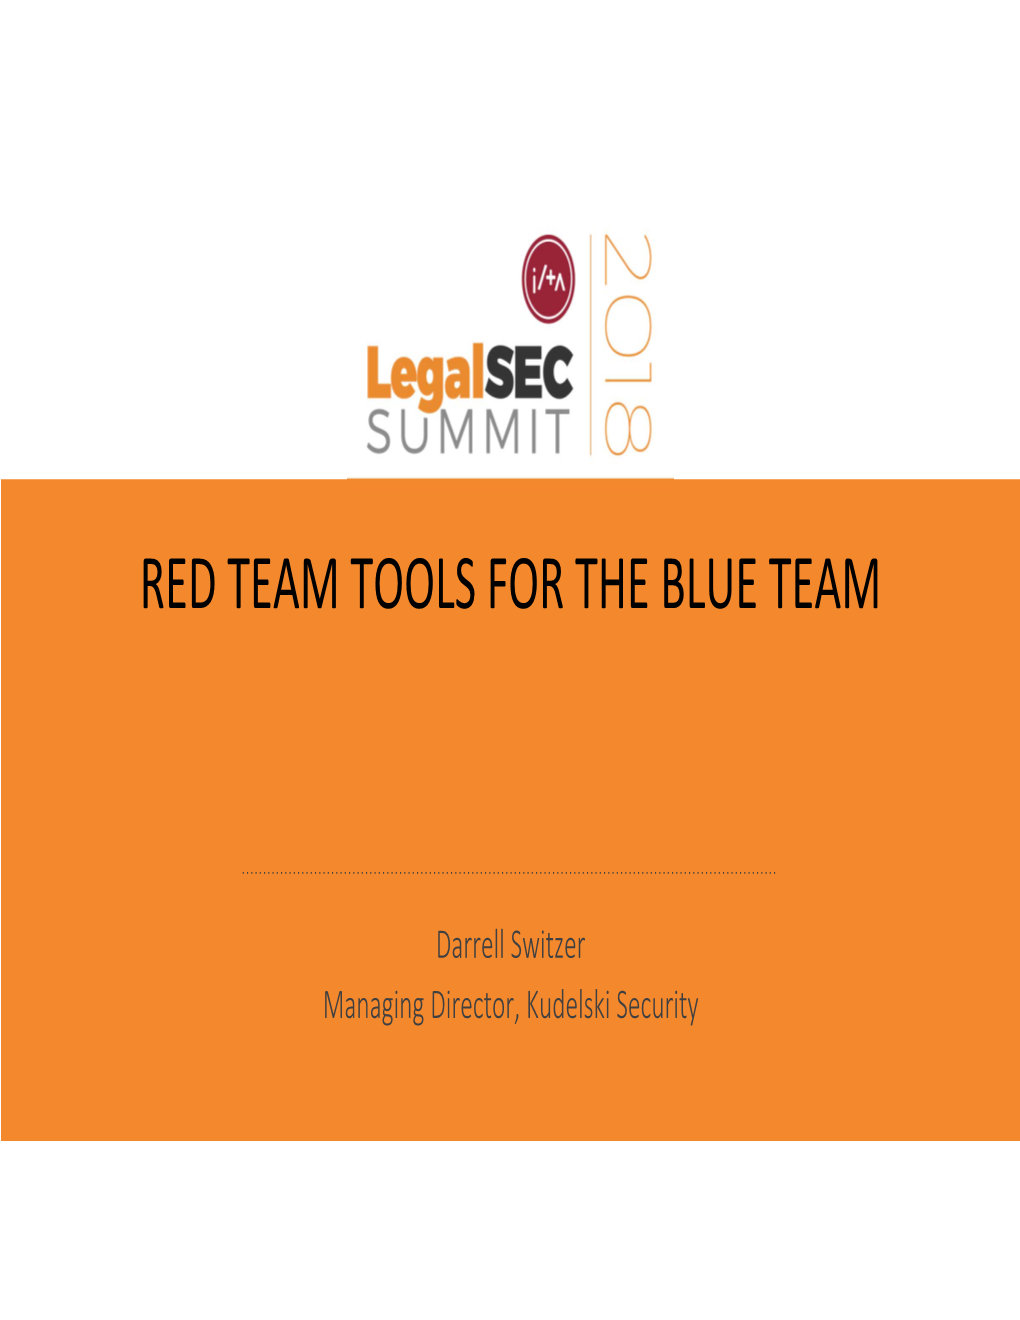 Red Team Tools for the Blue Team